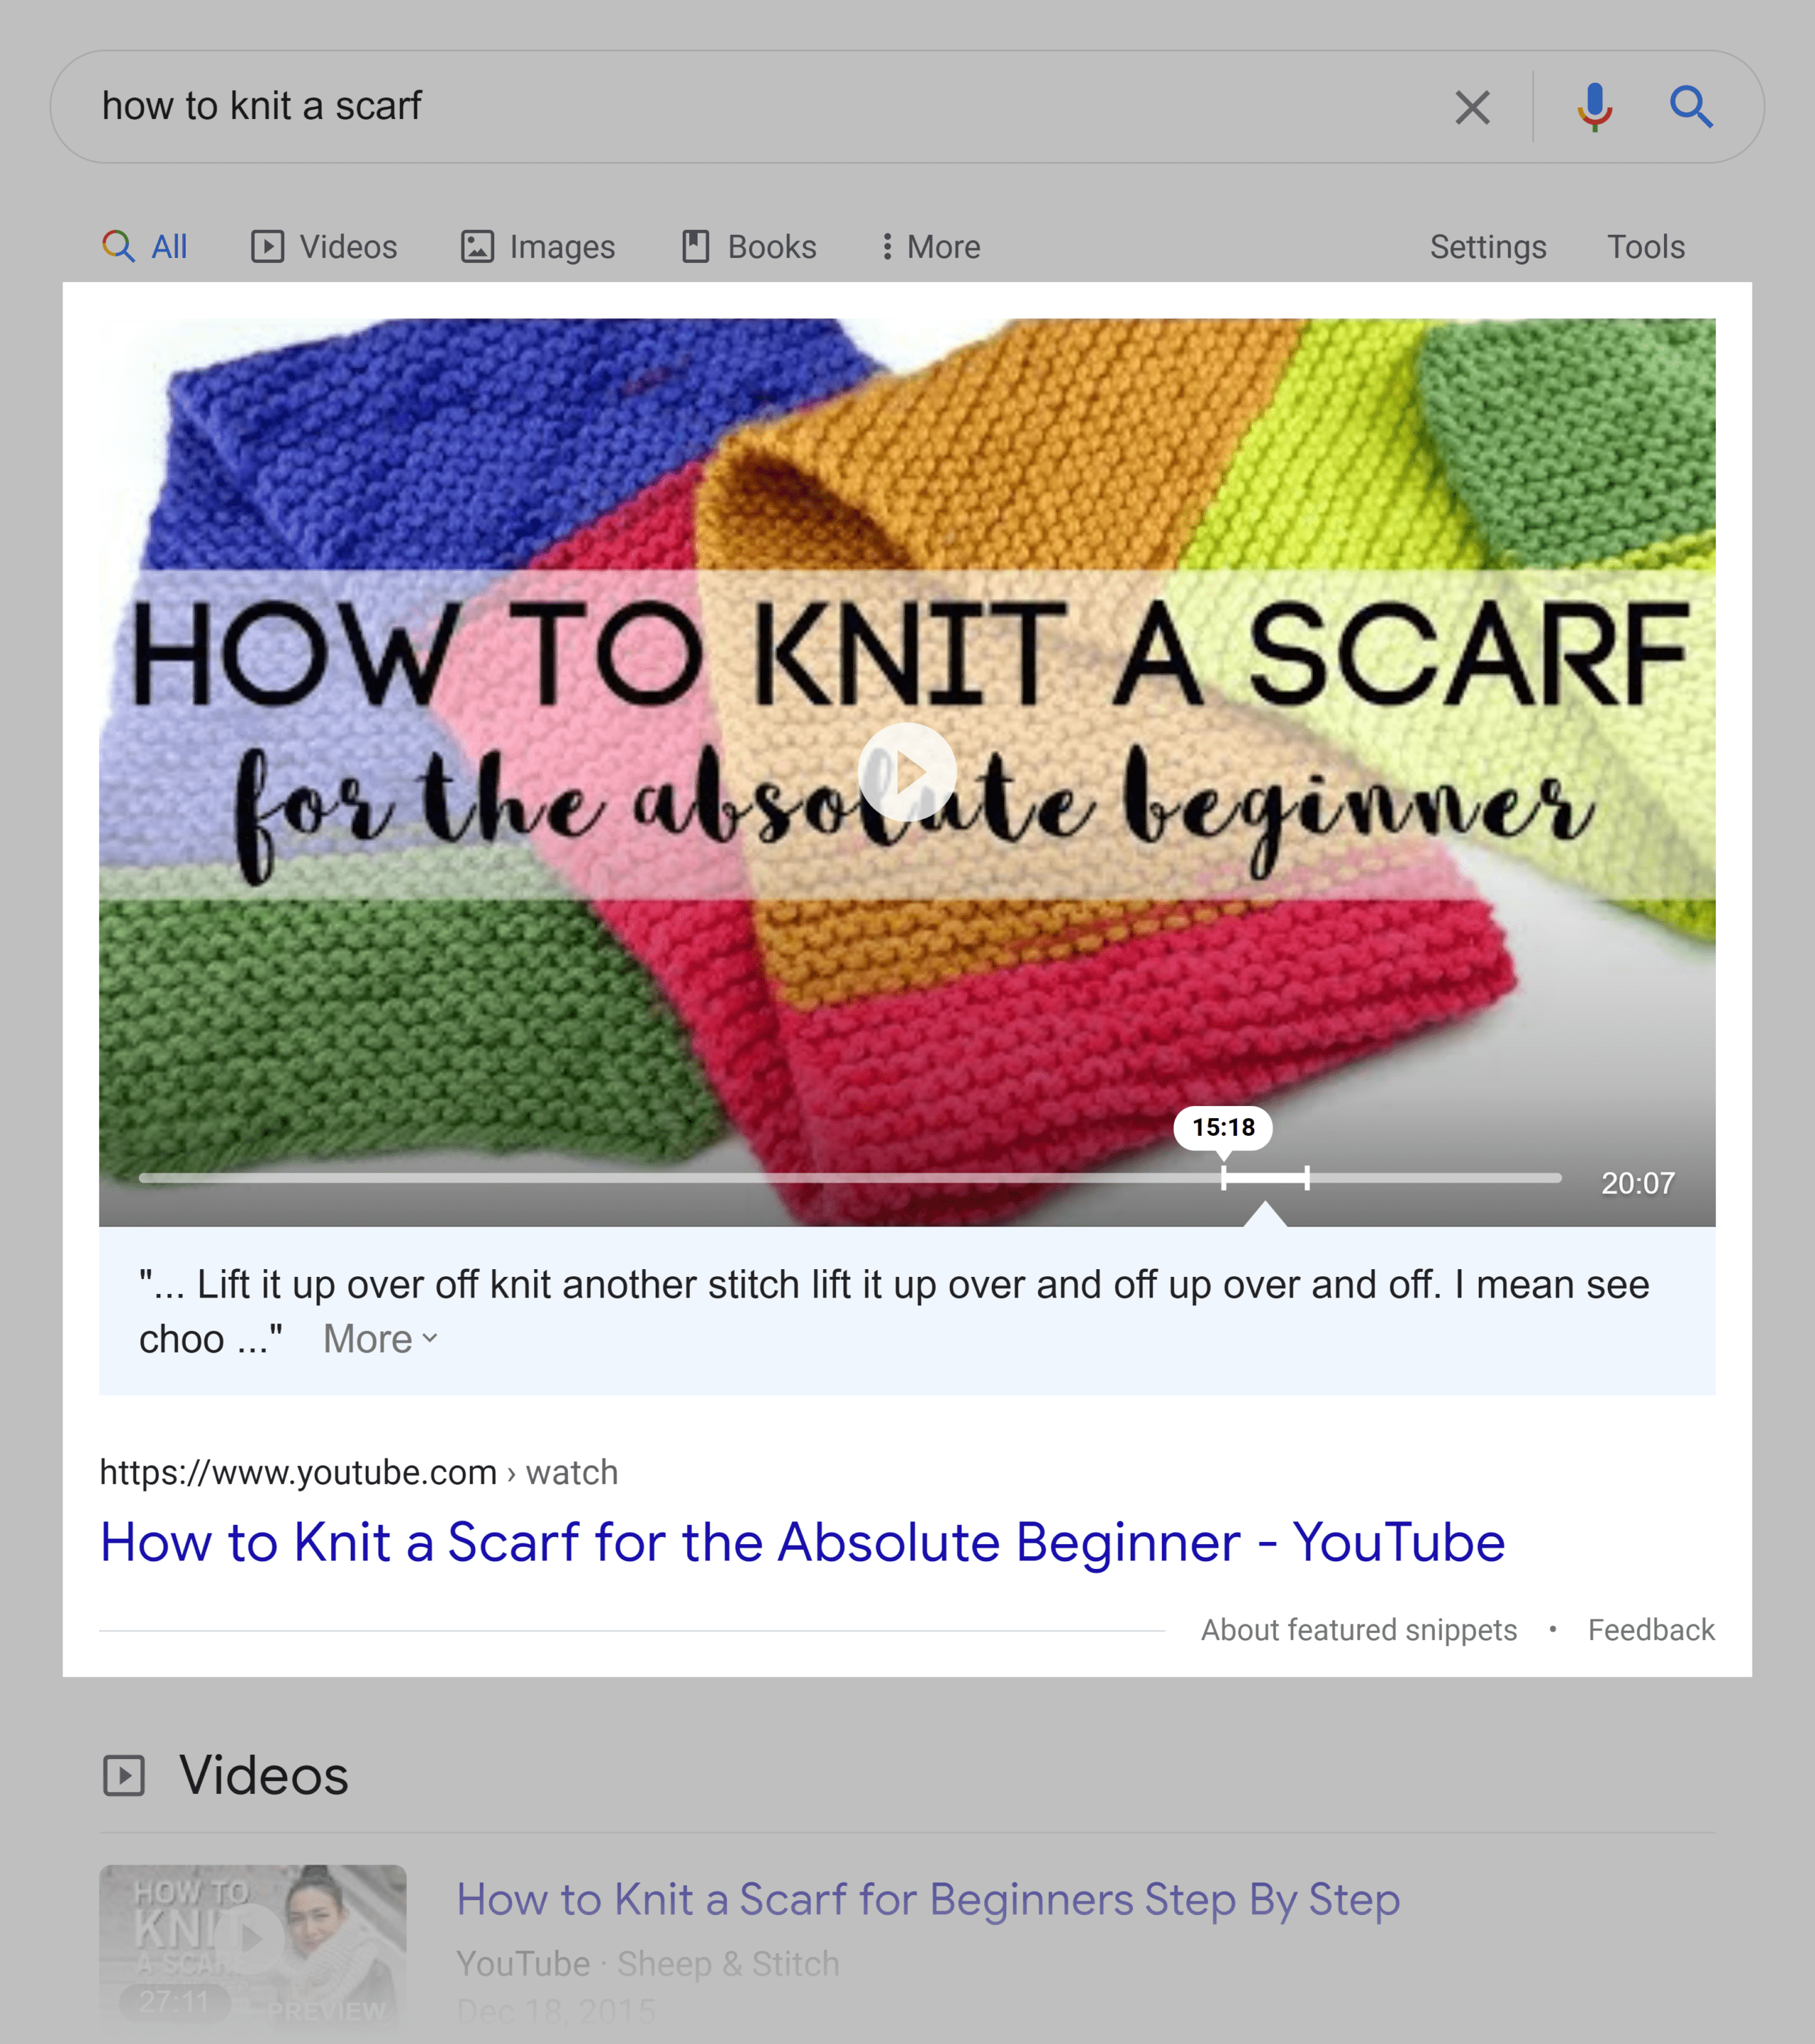 How to knit a scarf – Video featured snippet